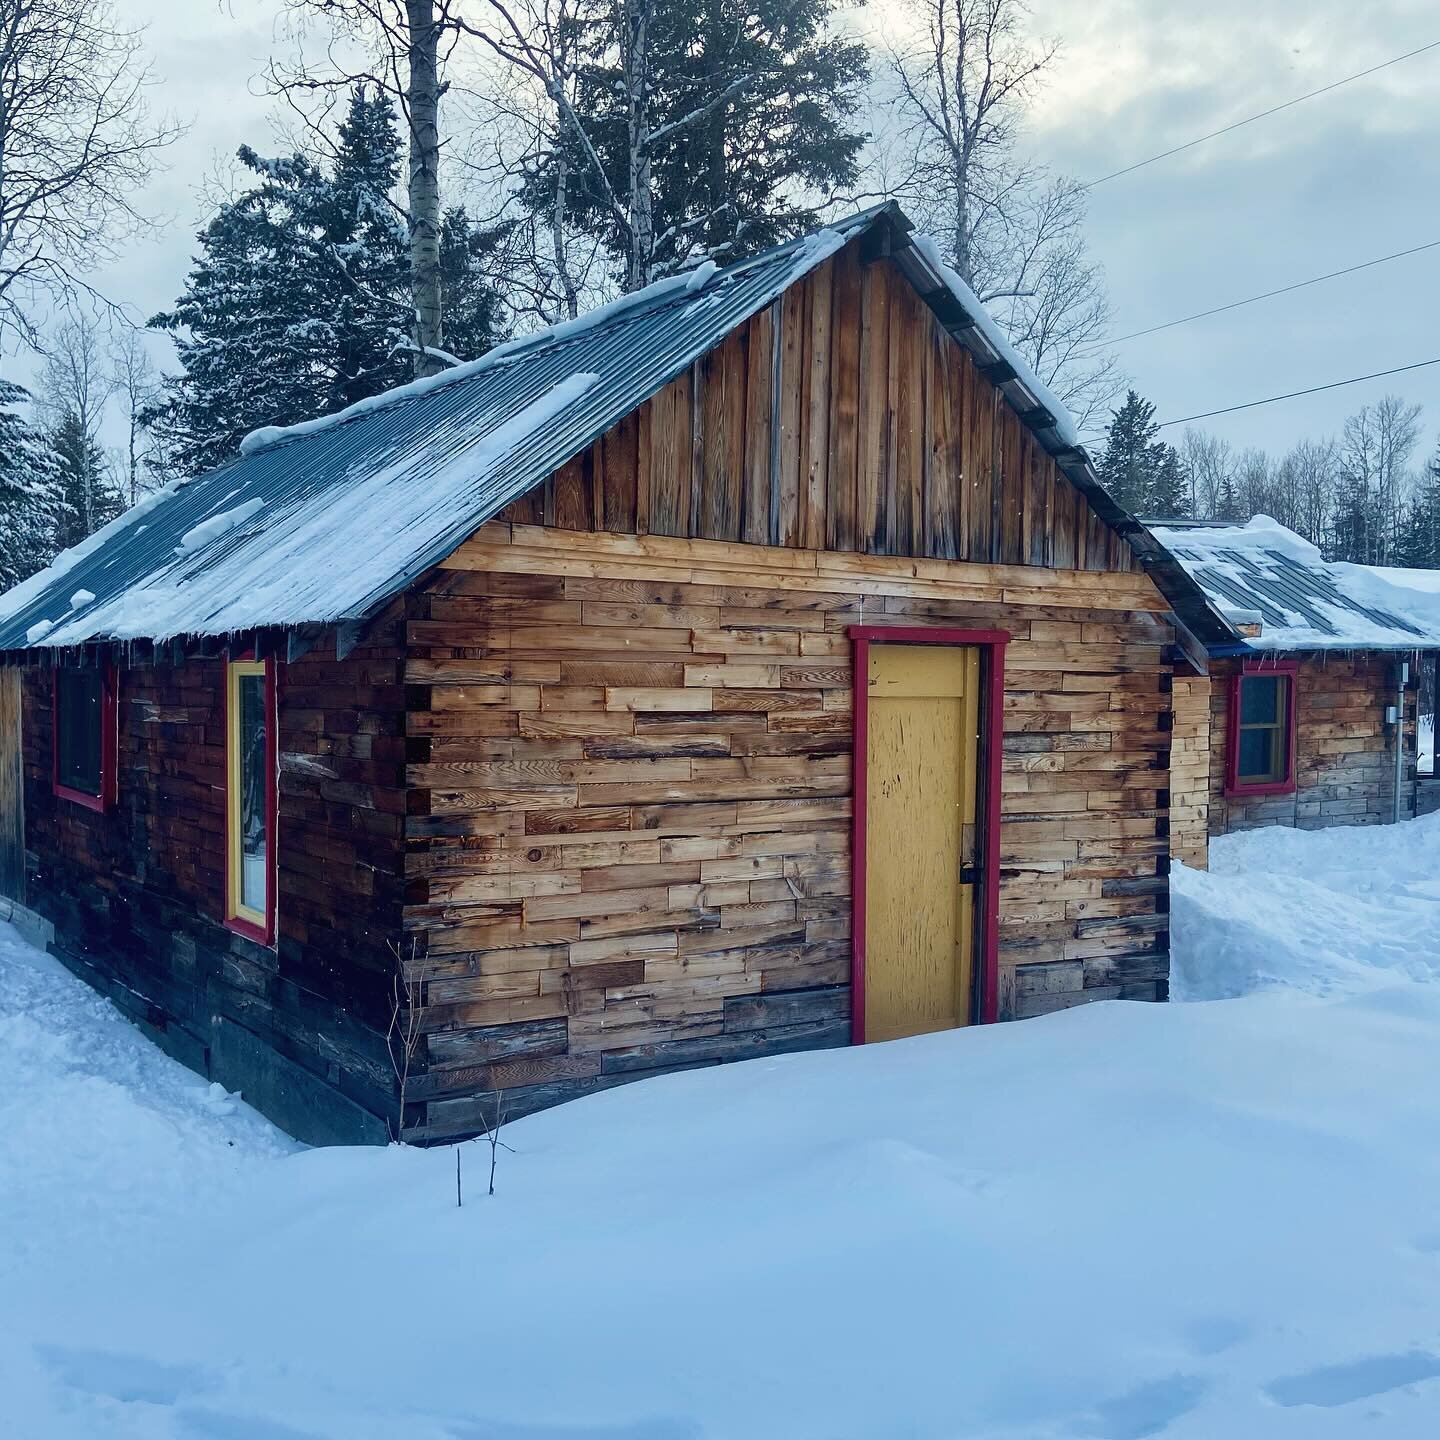 Last week I moved into a little cabin in the woods in the Blaeberry, BC. I am so grateful to be here. The Wildwood cabin is situated on fir, birch and cedar forest. Almost everyday I have been able to put on my skis and ski out my front door. On clea